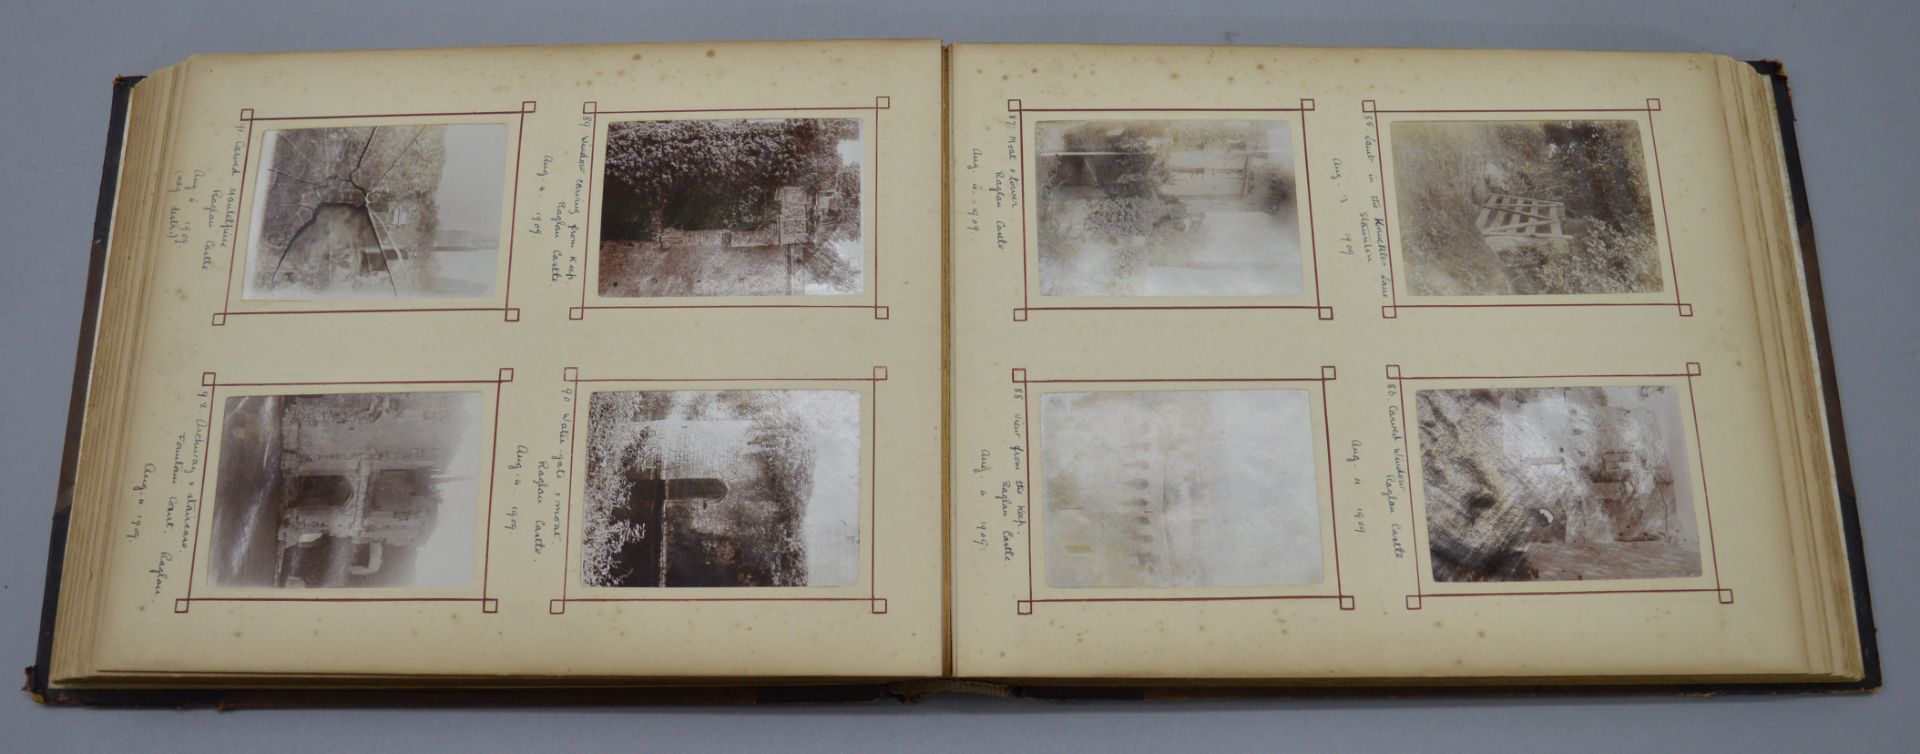 An interesting early 20th century family photo album with annotations and dating from 1905-1911